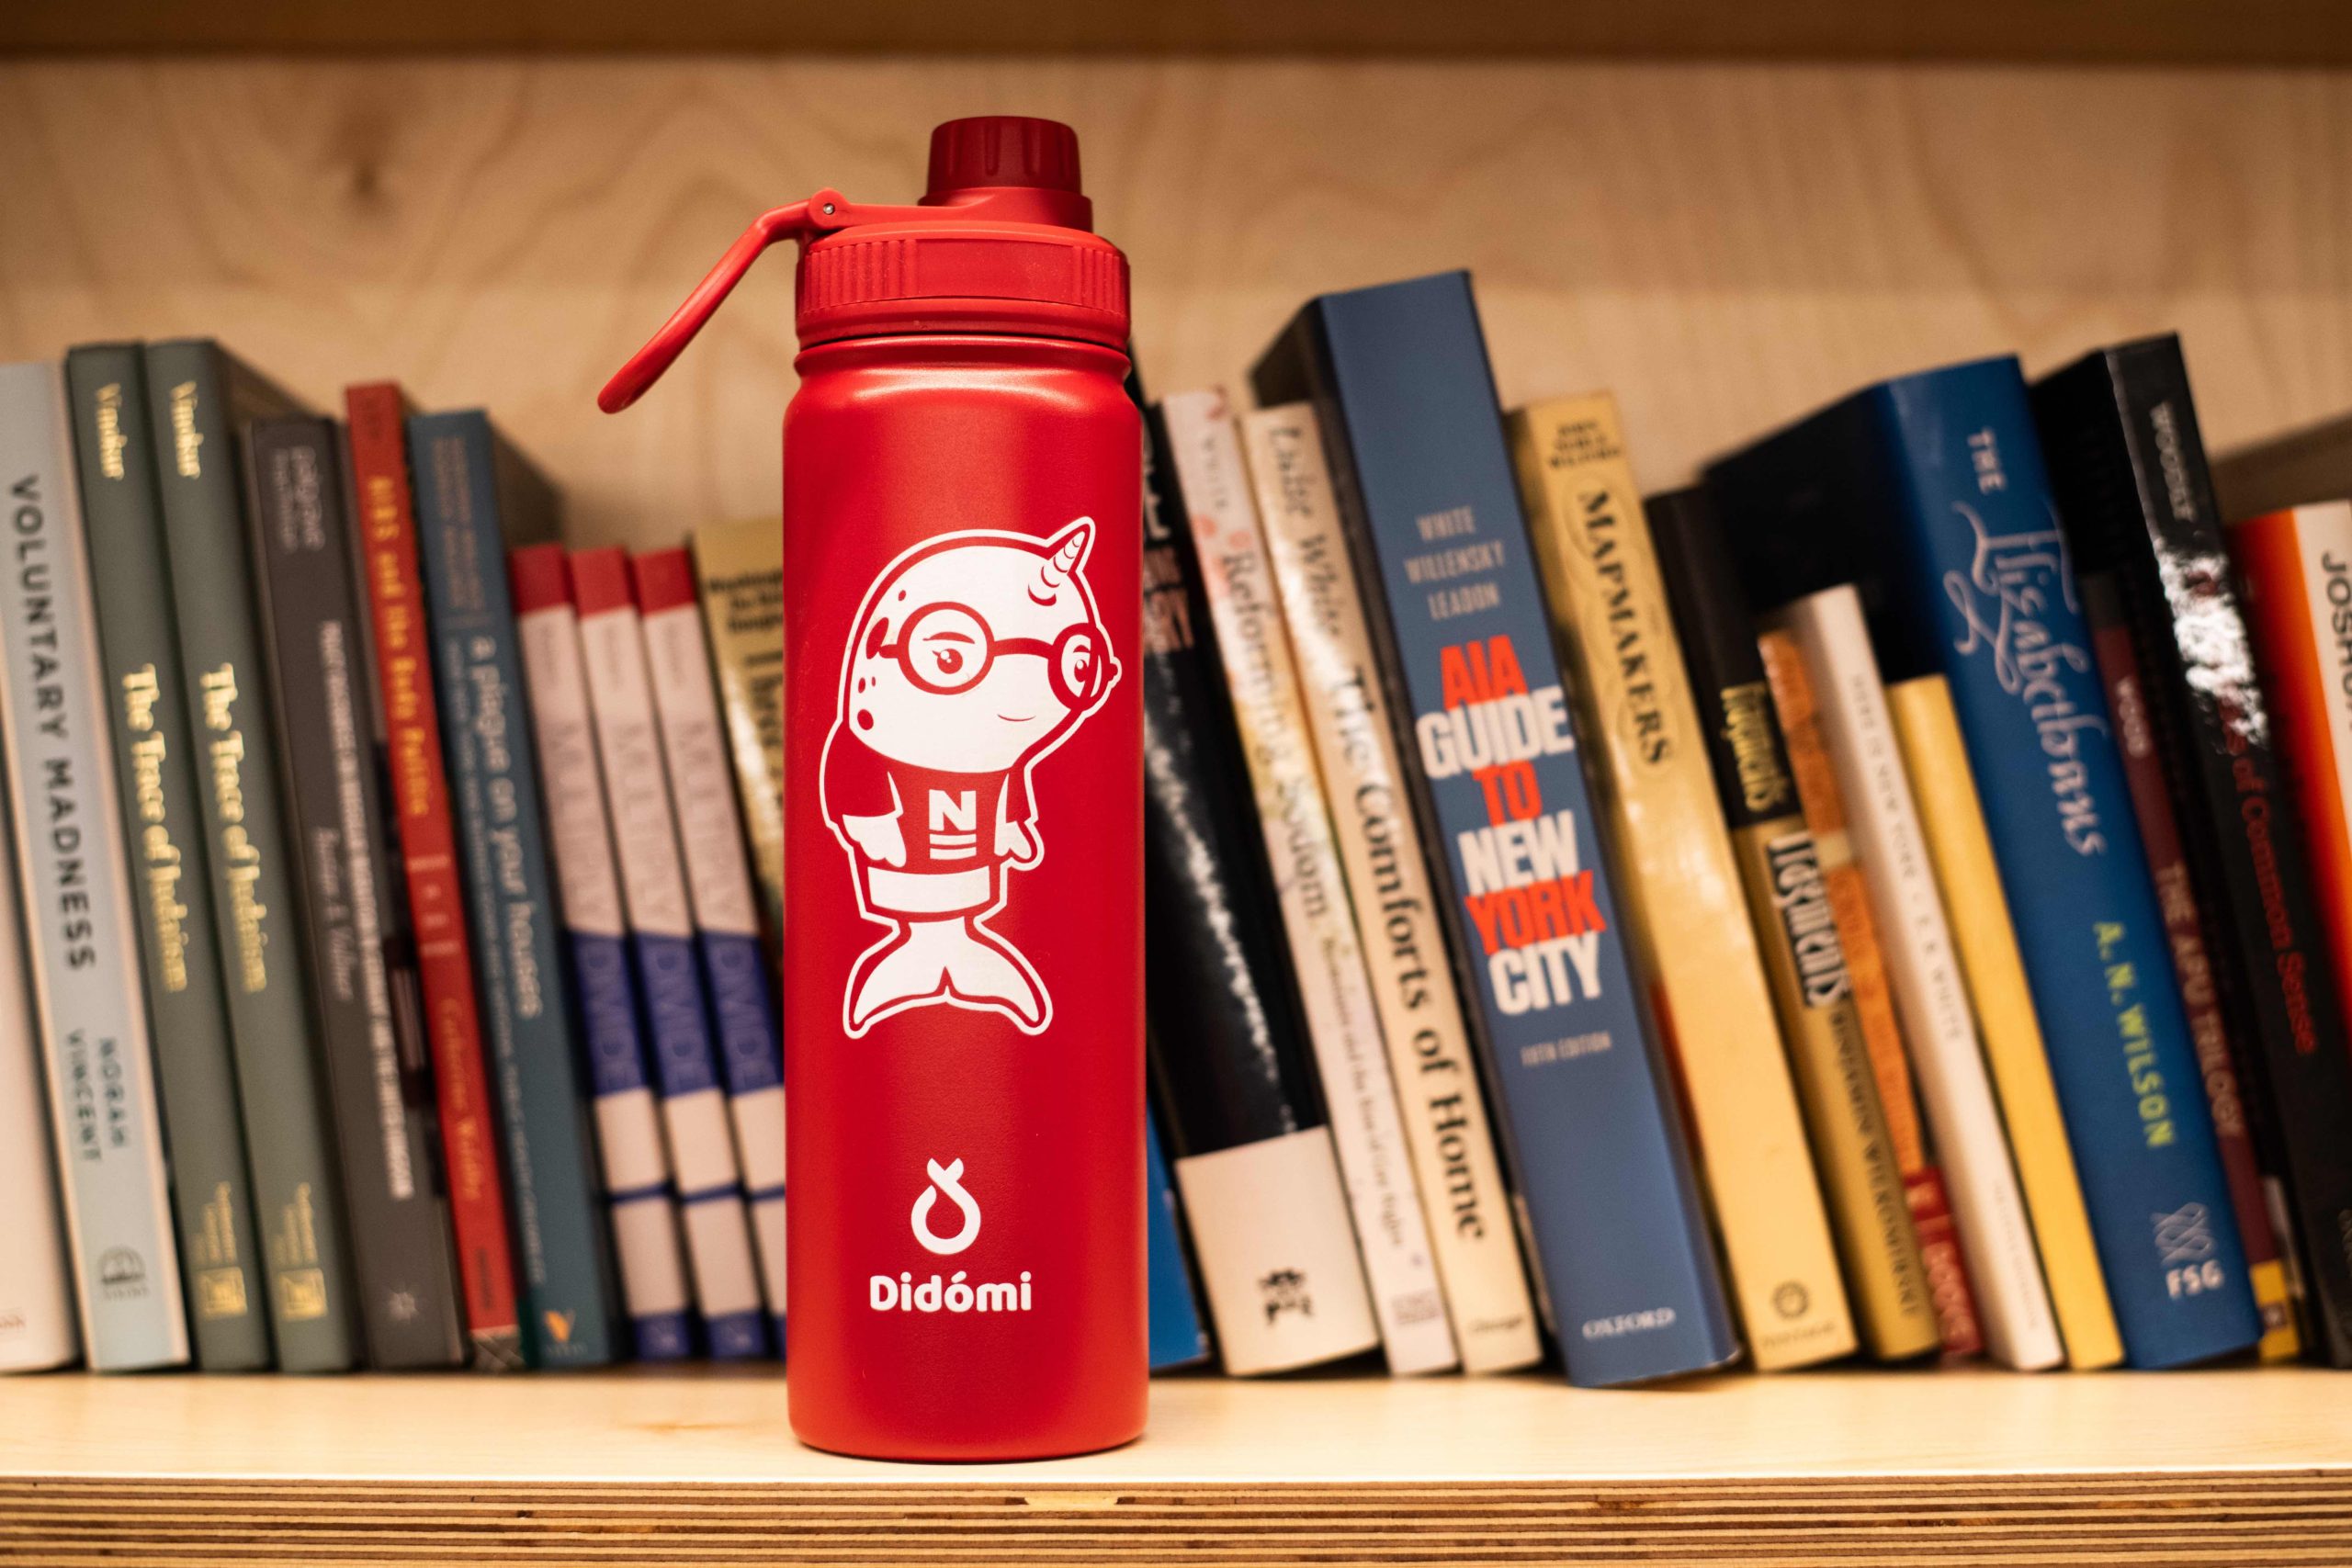 The collaborative effort to provide everyone on campus with a reusable water bottle involved a number of groups on campus, including the University Student Senate and Didomi, a social enterprise company